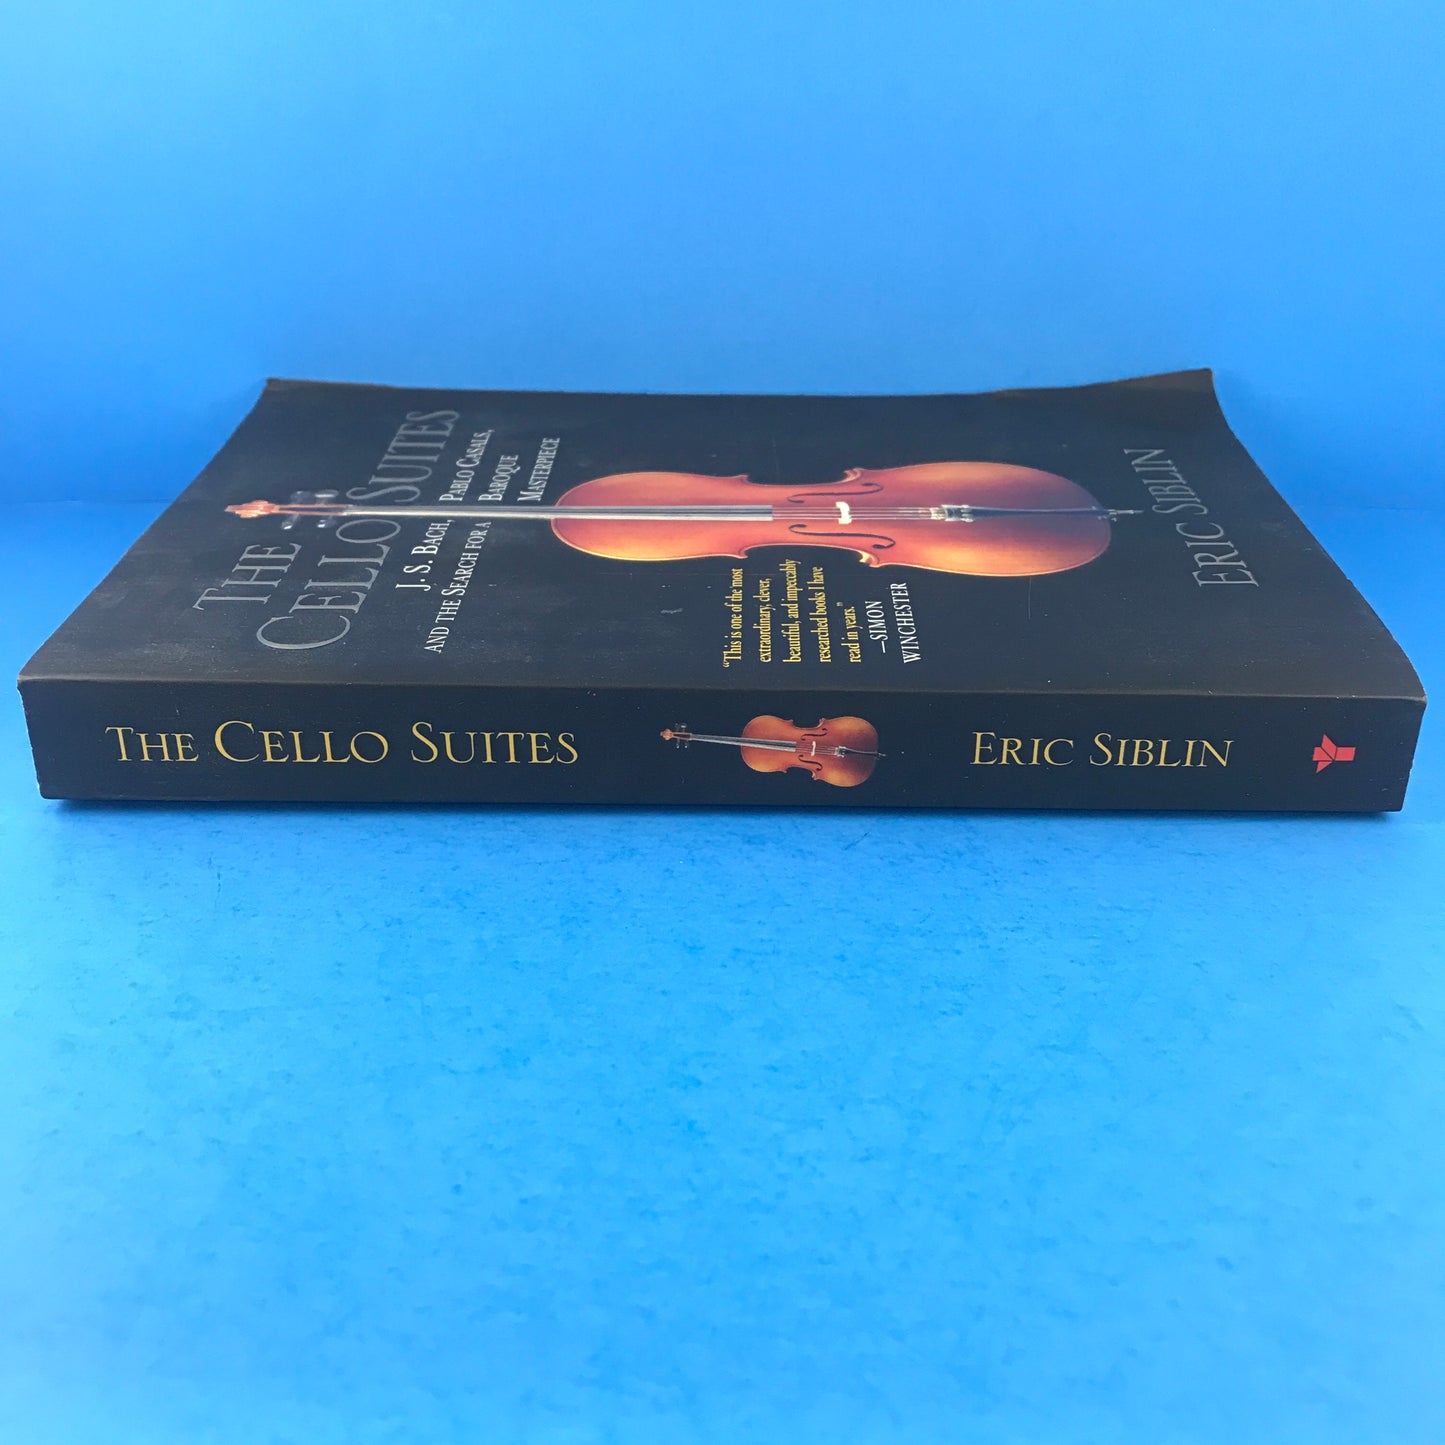 The Cello Suites: The Search for a Baroque Masterpiece